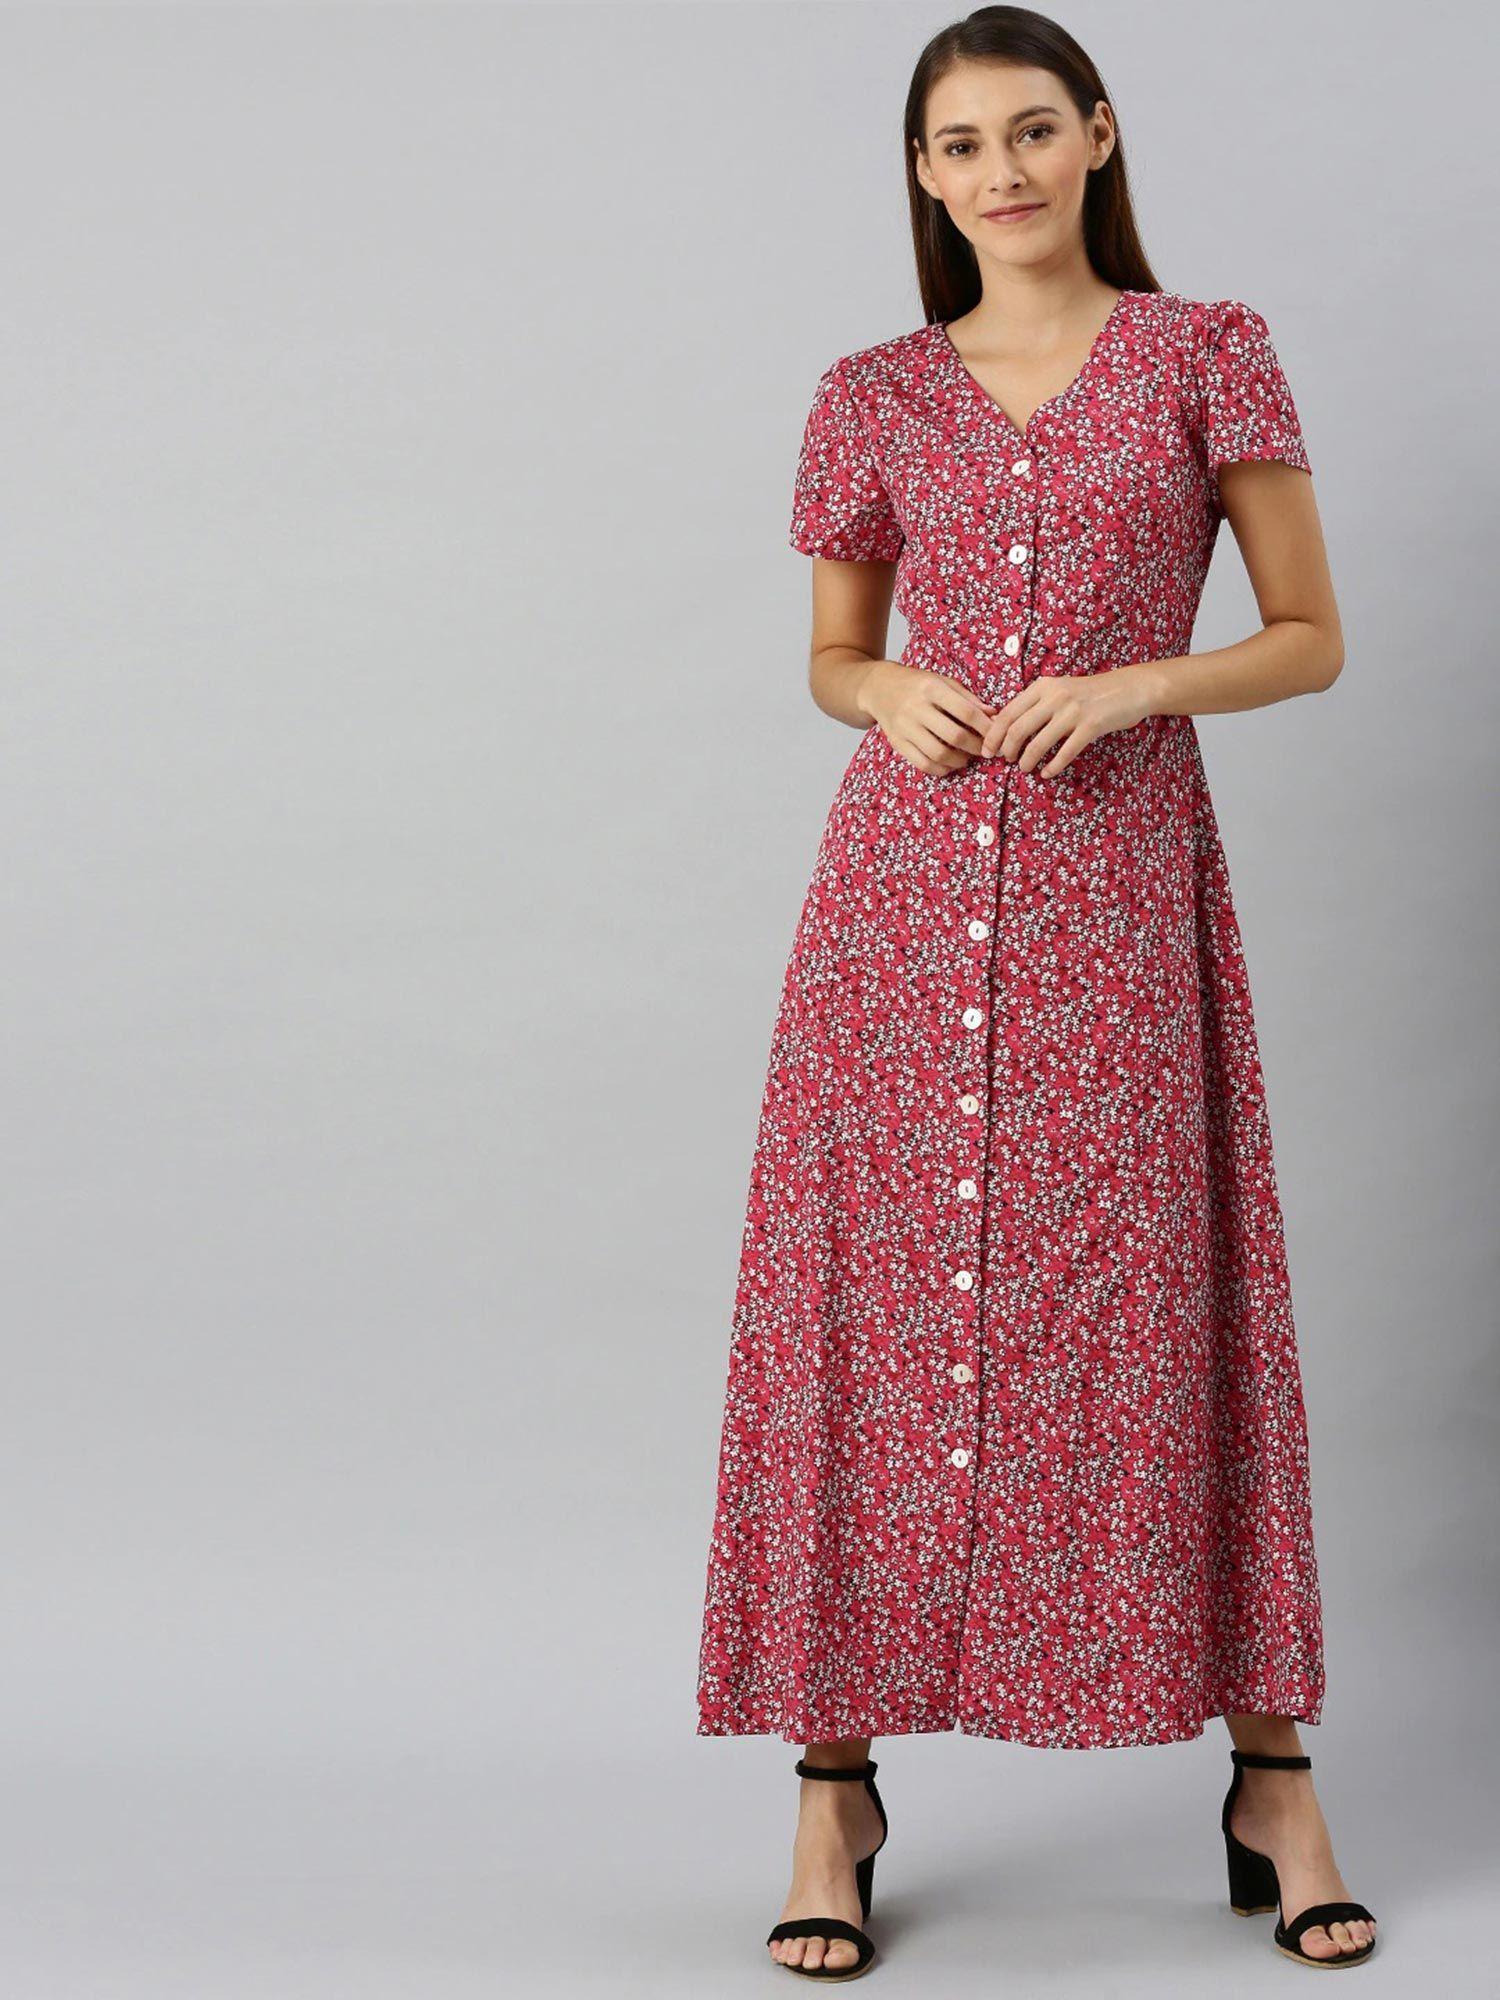 women's-red-and-white-floral-print-v-neck-dress